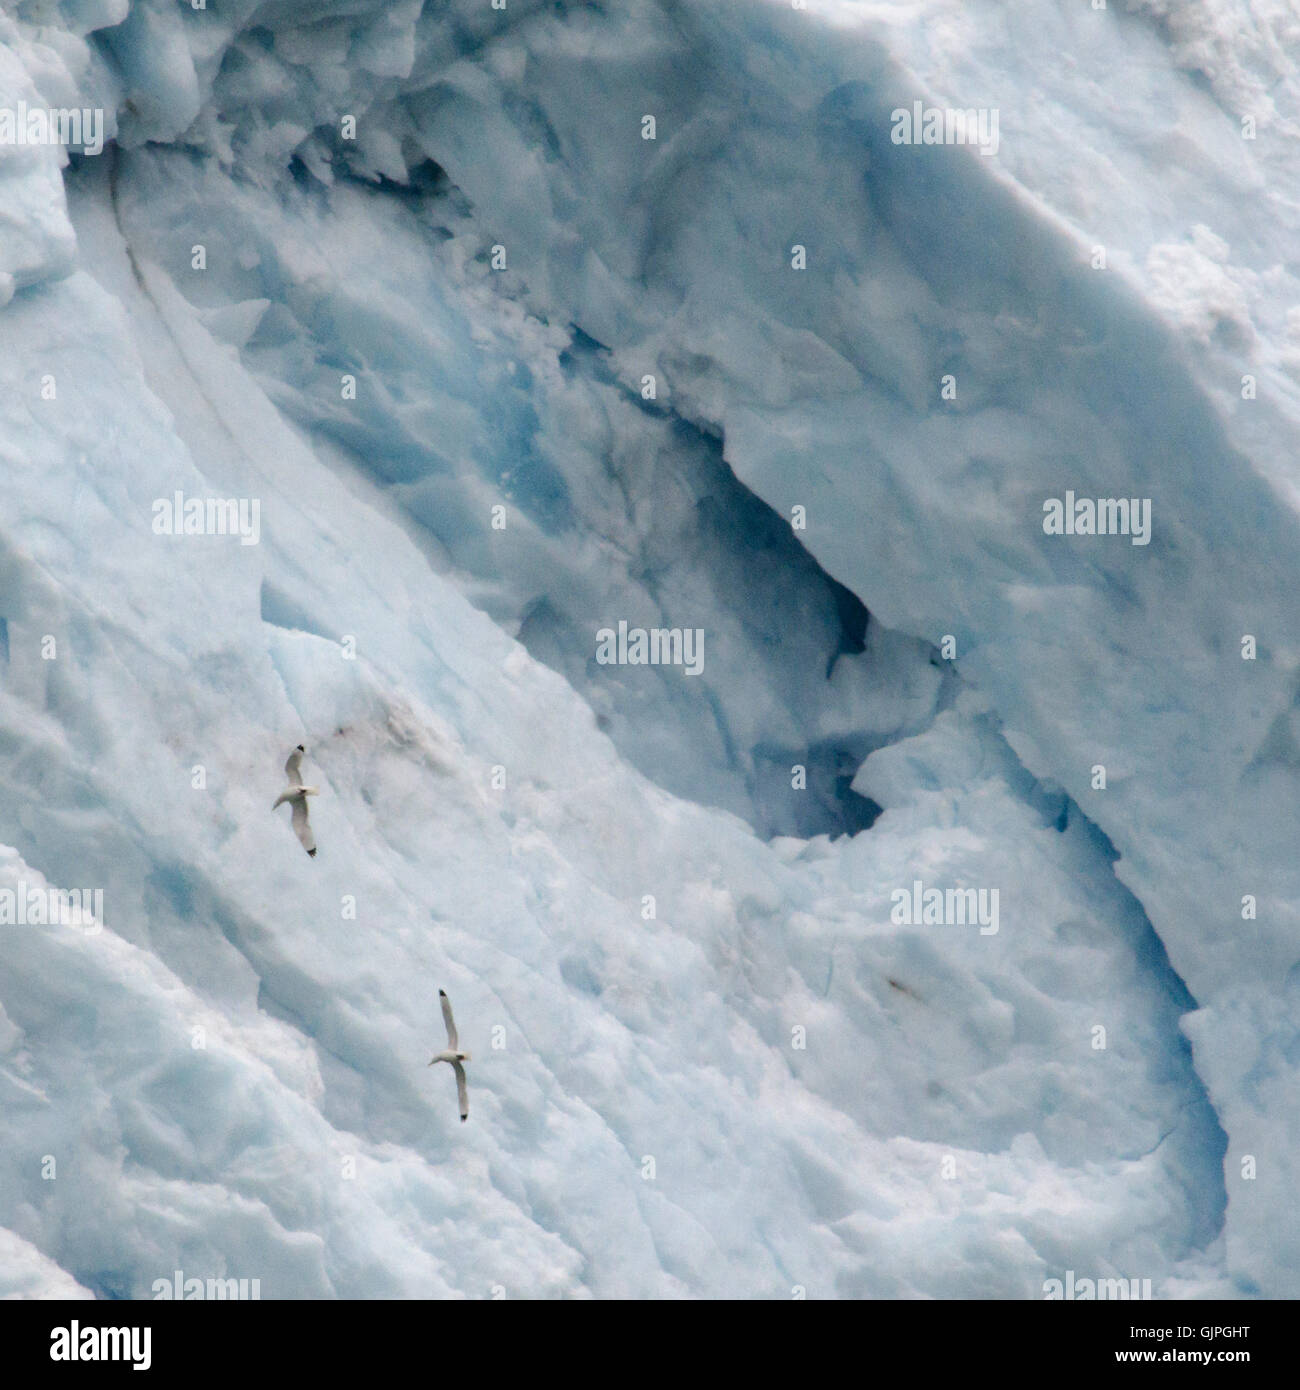 A pair of gulls circles on the thermals created by a glacier Stock Photo